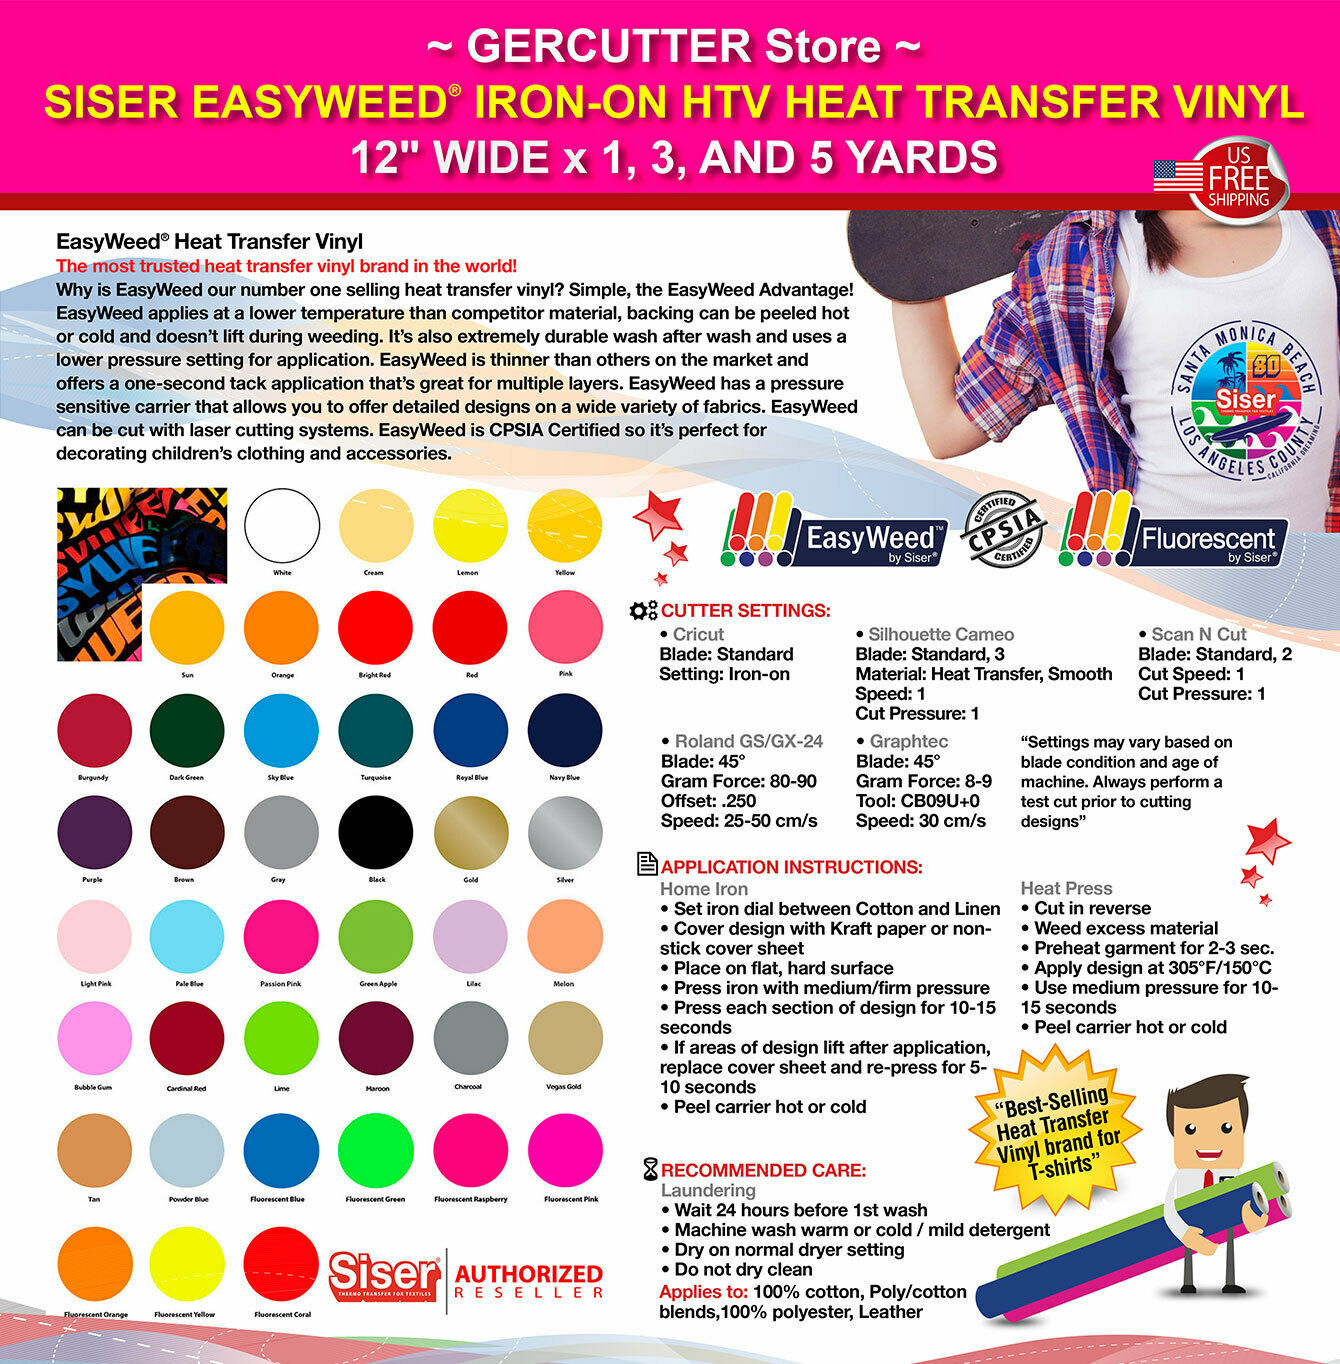 Siser Easyweed Iron-on Htv Heat Transfer Vinyl 12" Wide X 1, 3, And 5 Yards